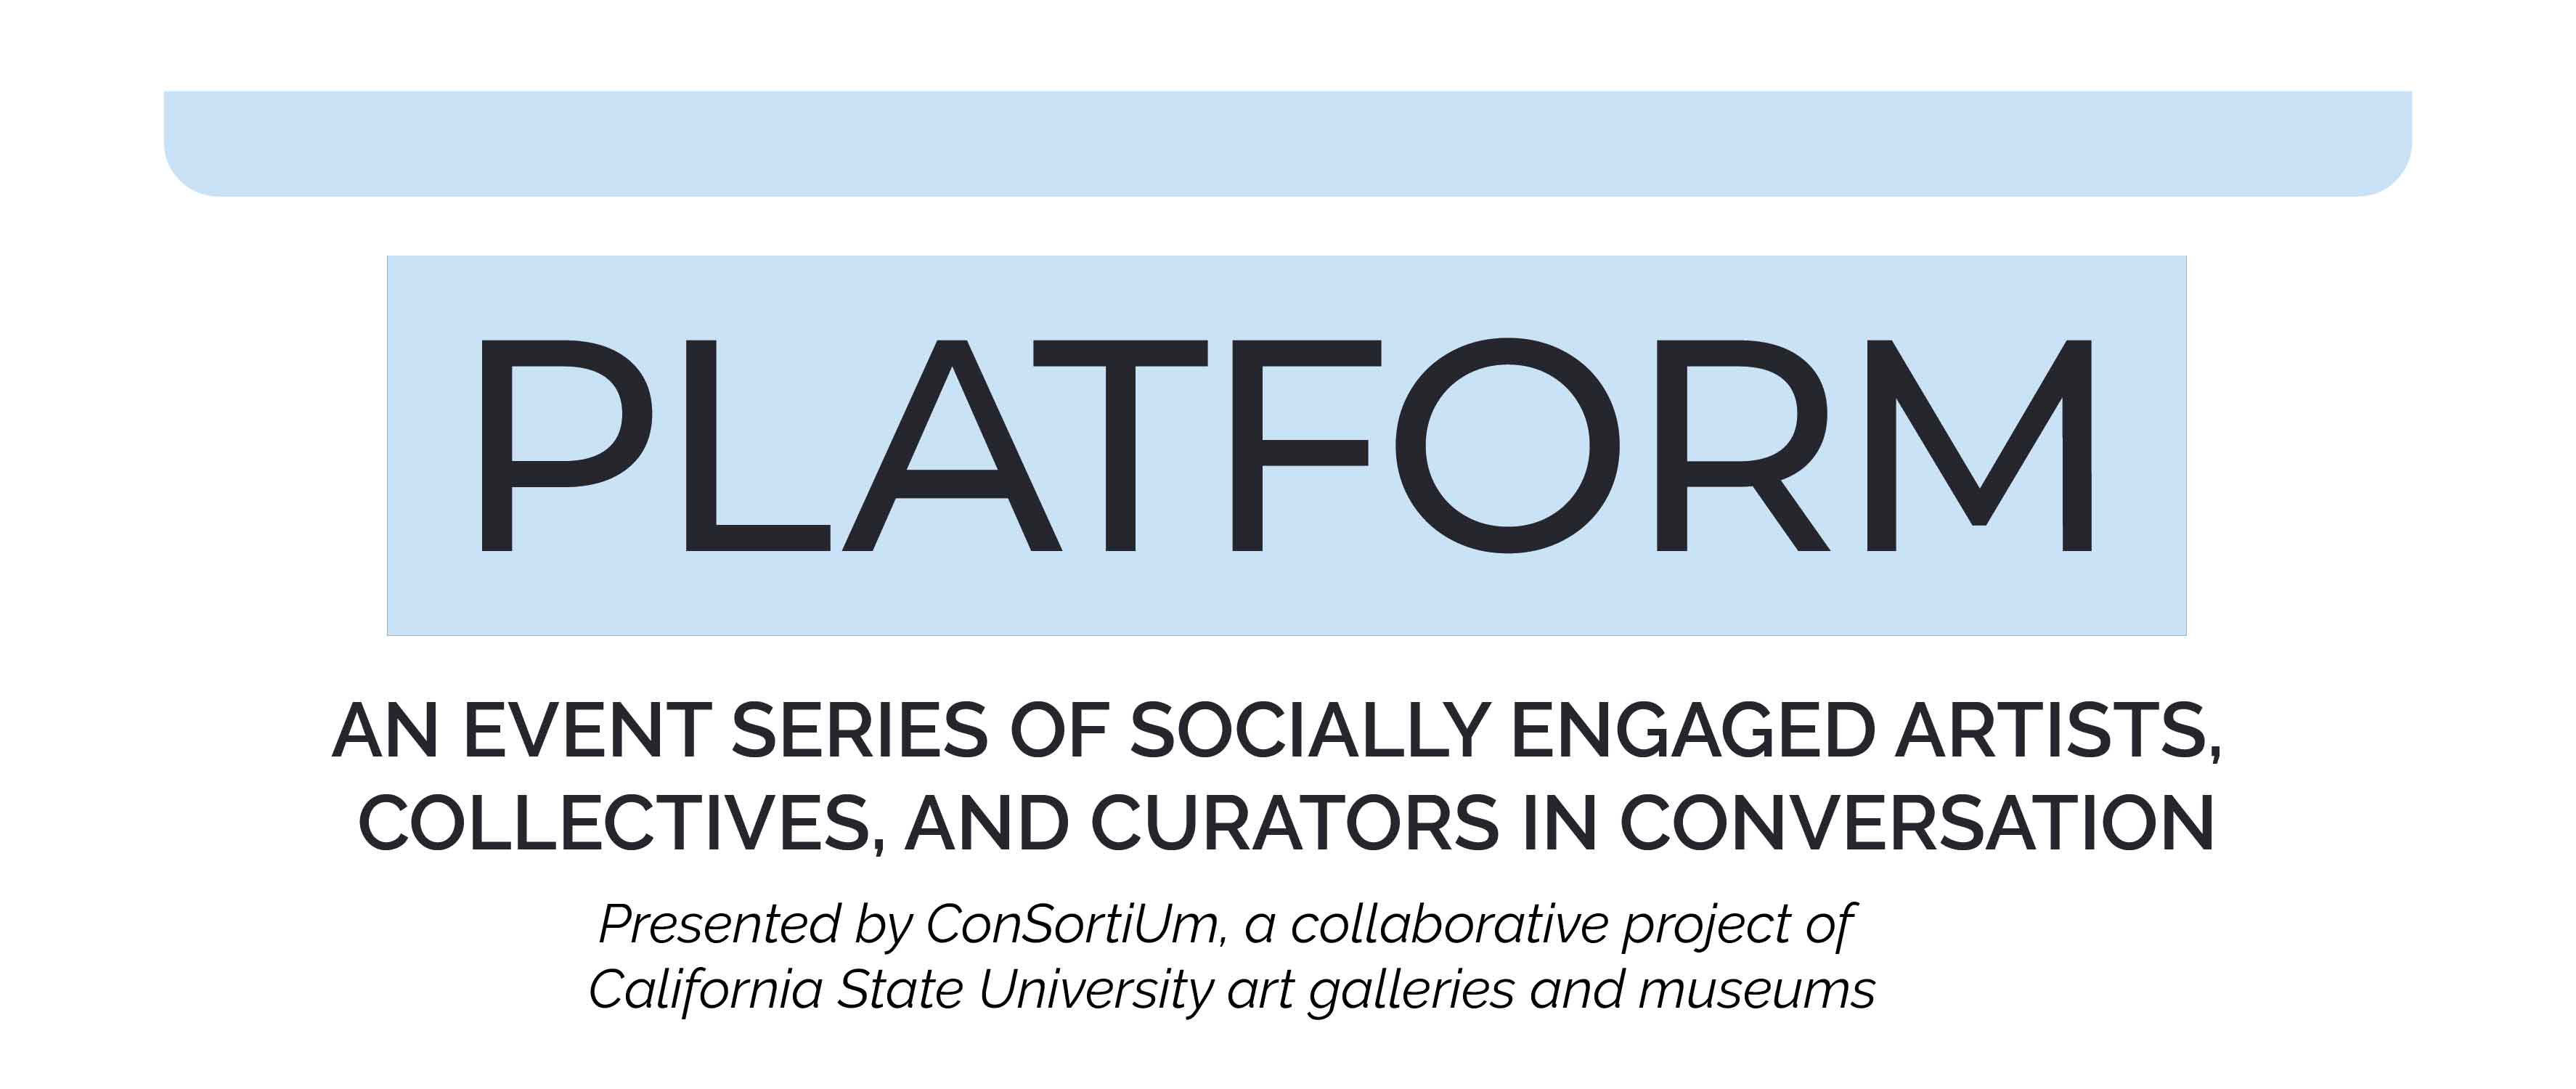 Blue and Black Event Logo PLATFORM: An Event Series of Socially Engaged Artists, Collectives, and Curators in Conversation presented by ConSortiUm, a newly formed collaborative group of CSU art galleries and museums